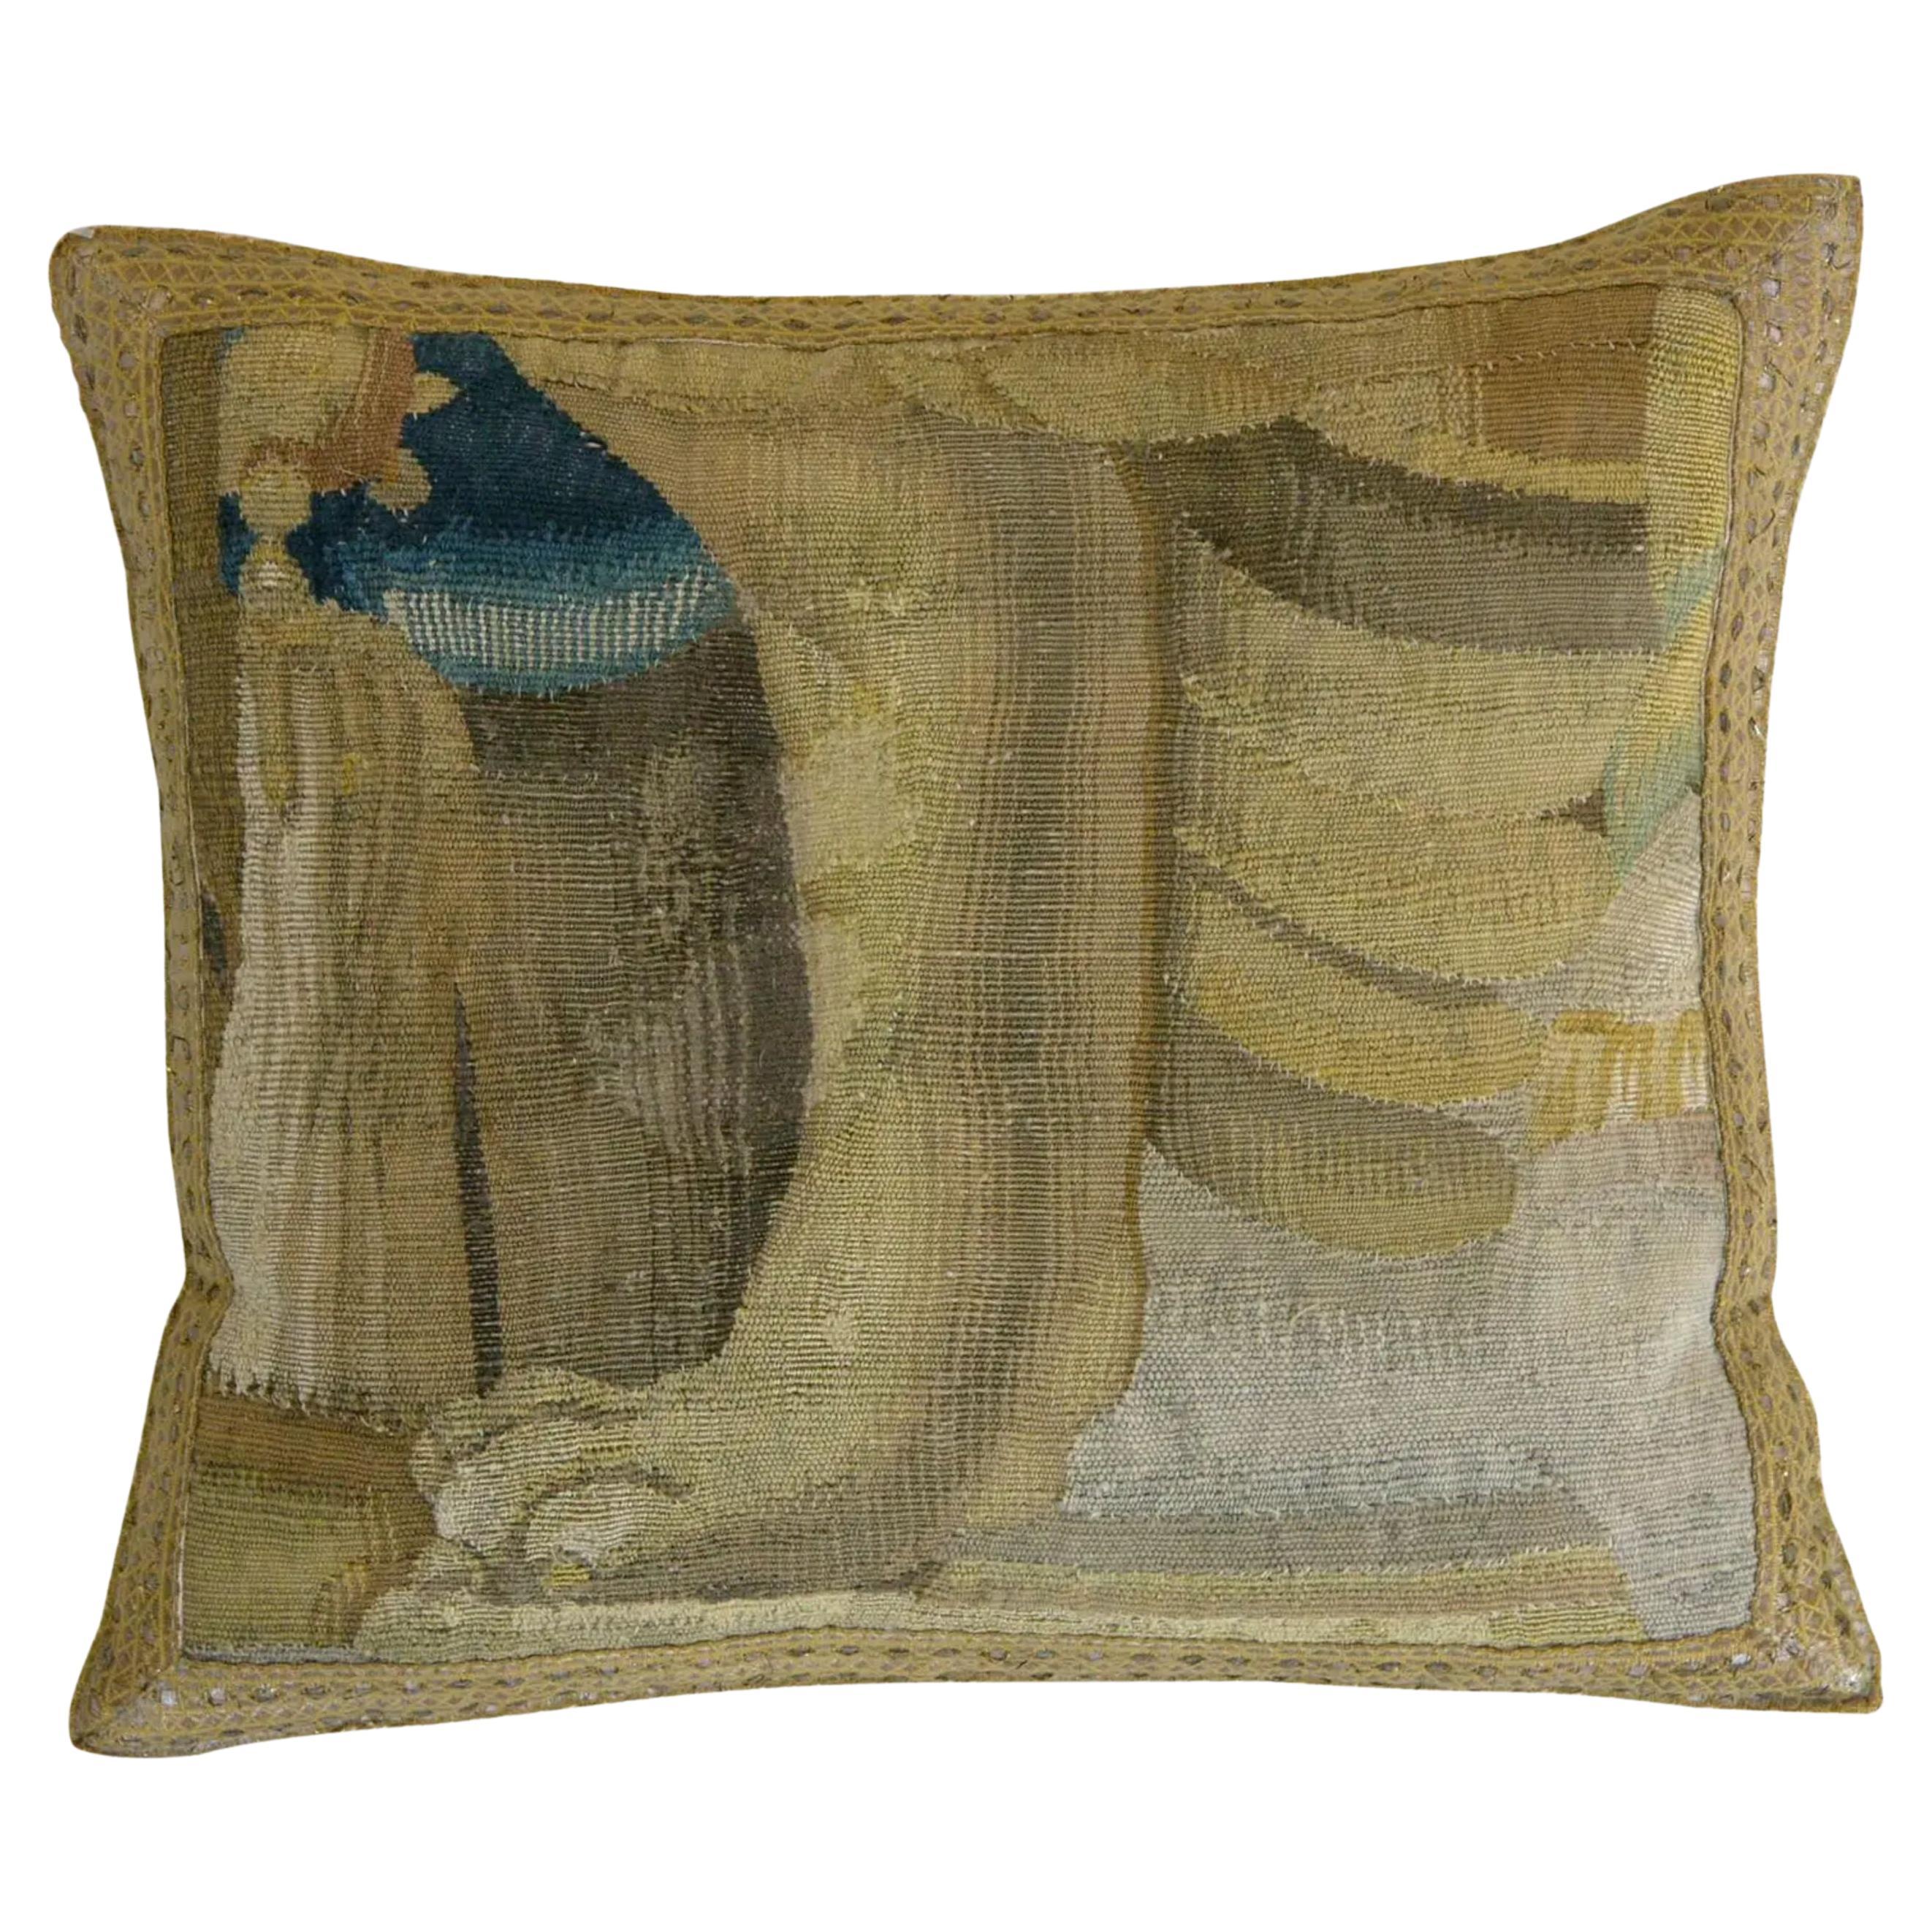 16th Century Antique Brusslls Baroque Tapestry Pillow - 17'' X 16'' For Sale